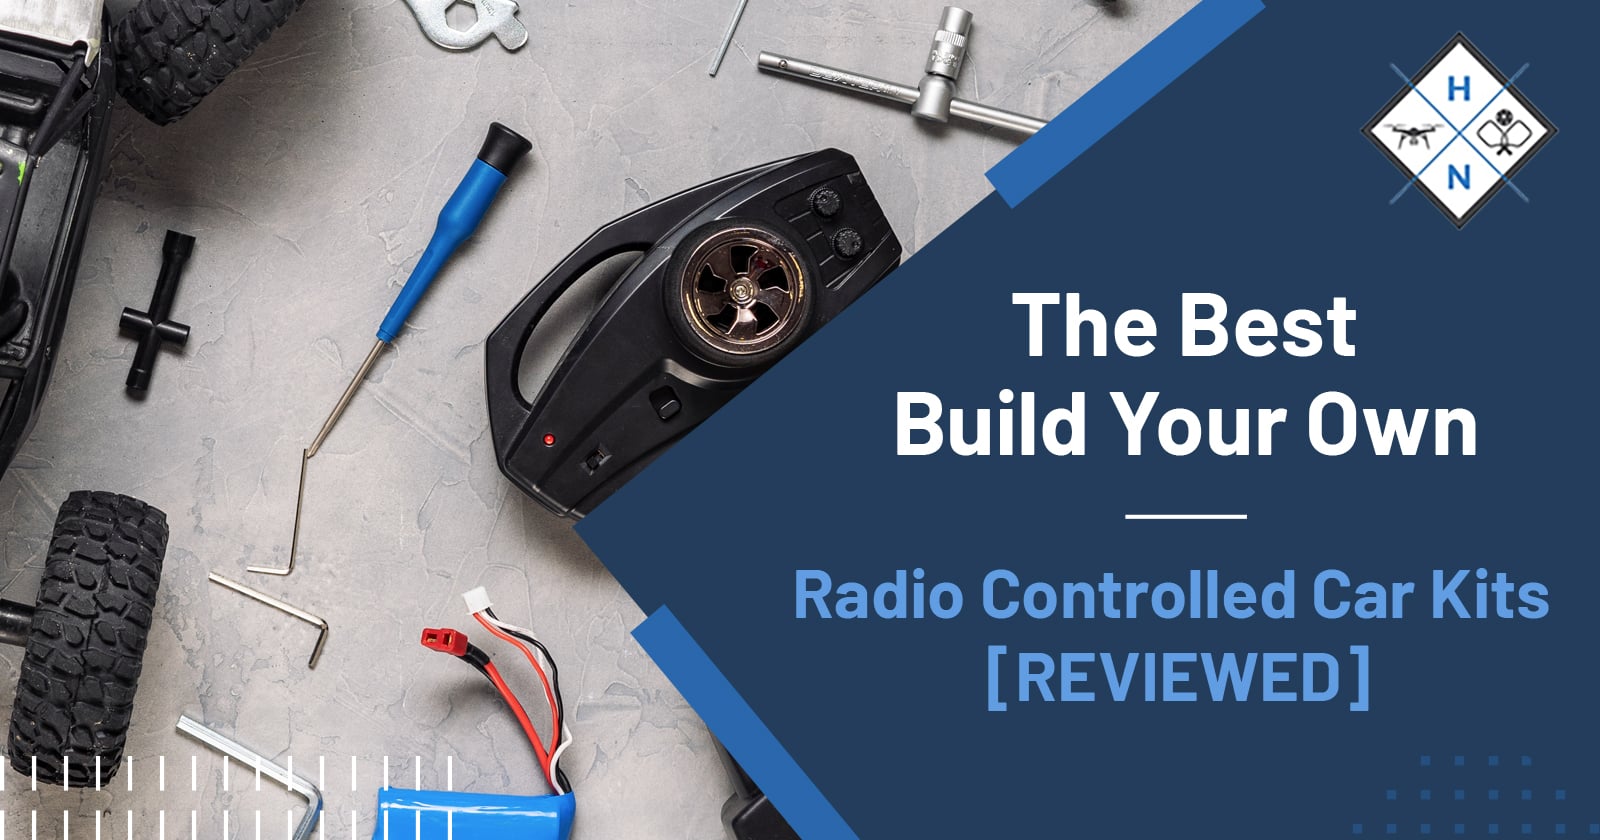 The Best Build Your Own Radio-Controlled Car Kits [REVIEWED]